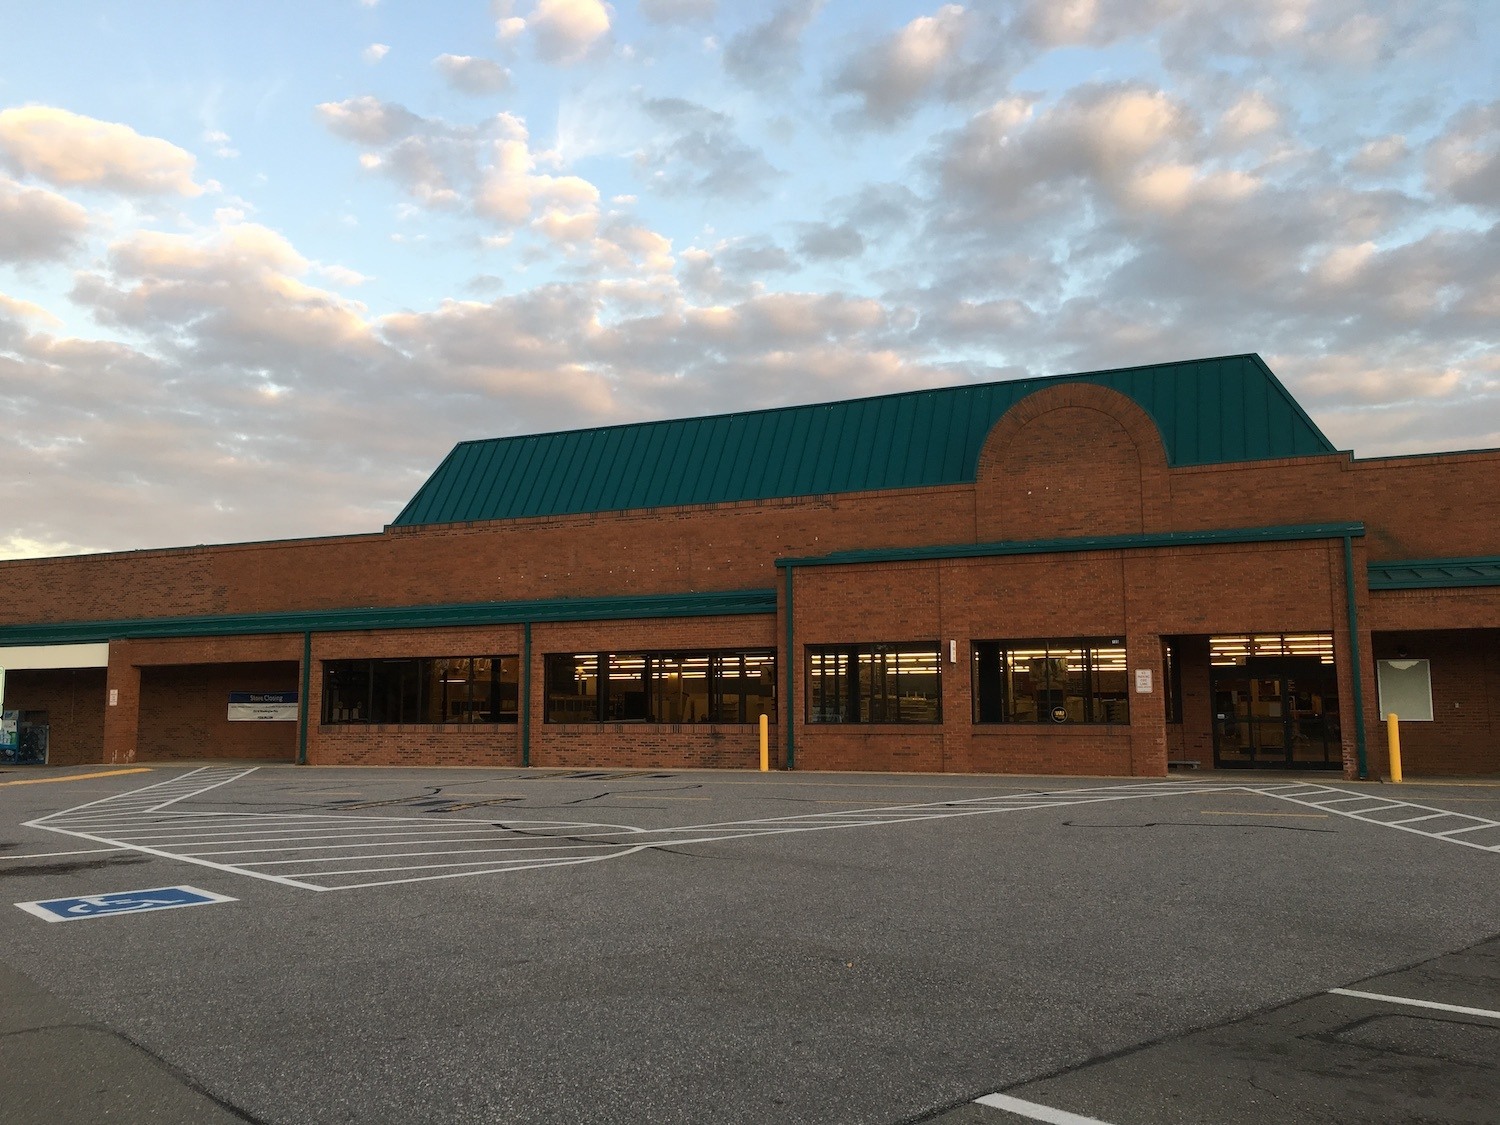 This is former Food Lion #679, located at 135 Junction Drive in Ashland, VA. MAY 2022